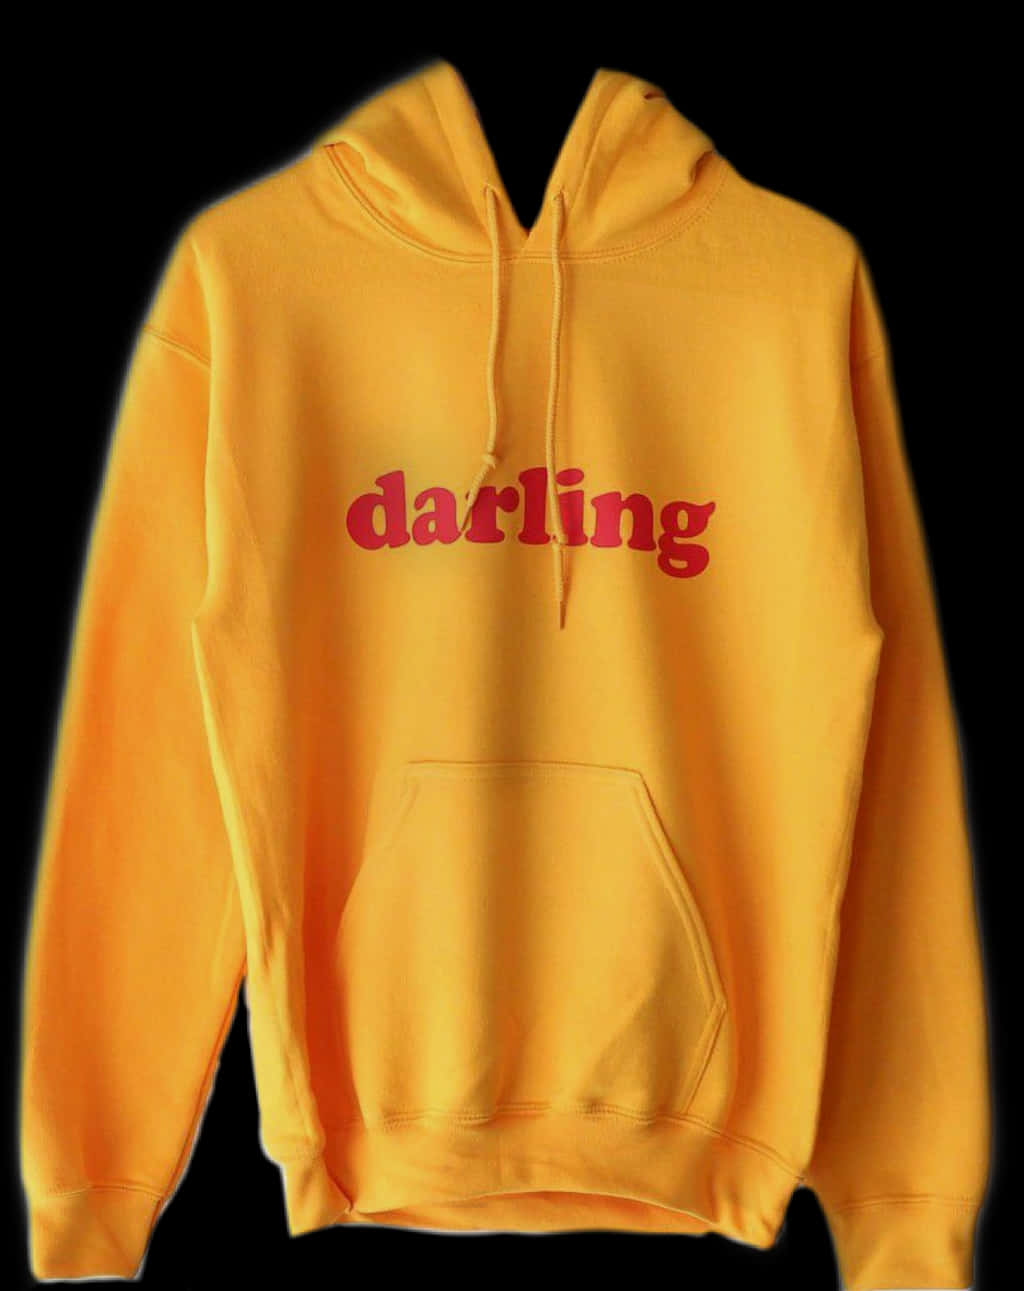 A Yellow Sweatshirt With Red Text